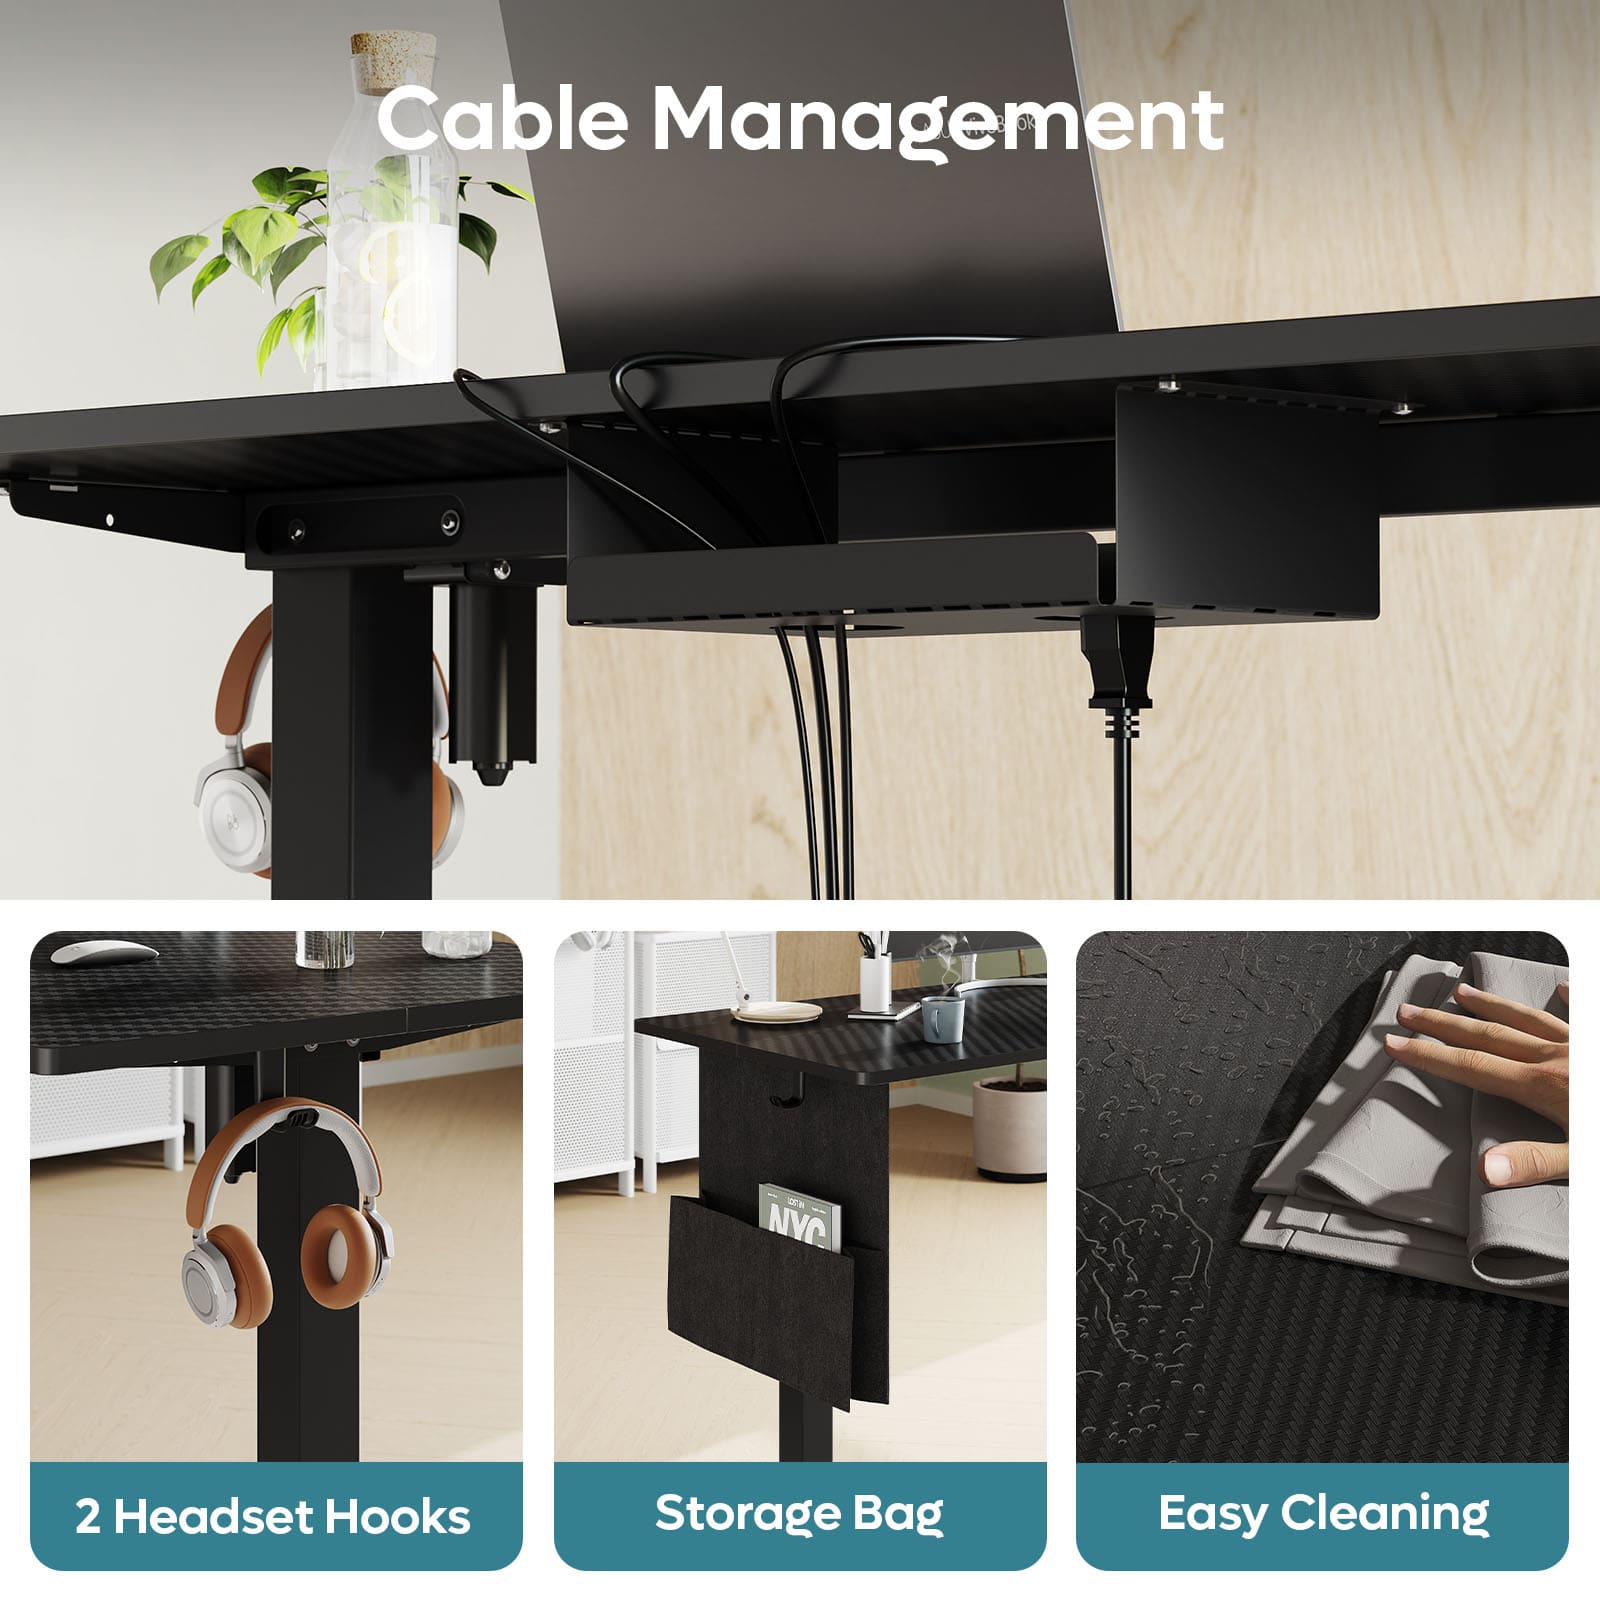 standing desk with cable management, headset hooks, storage bag and easy cleaning